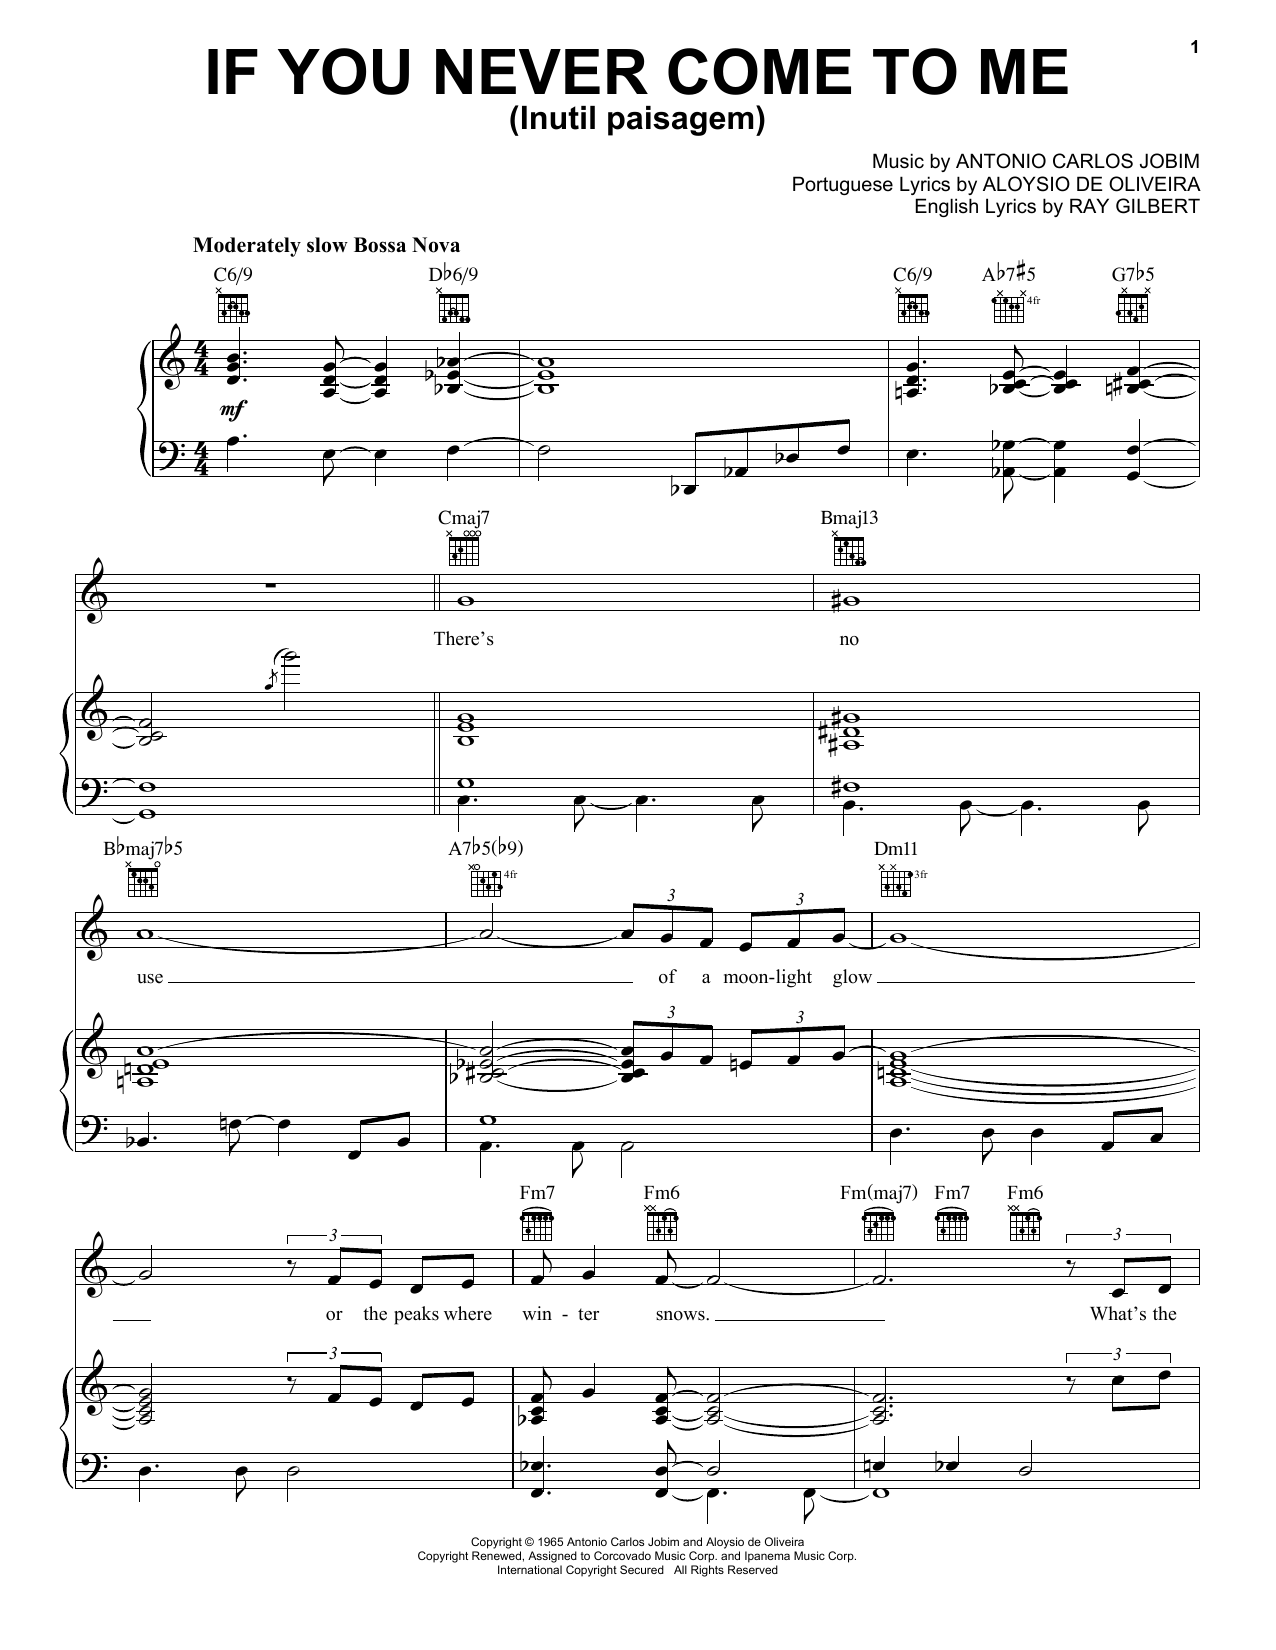 Antonio Carlos Jobim If You Never Come To Me (Inutil Paisagem) sheet music notes and chords. Download Printable PDF.